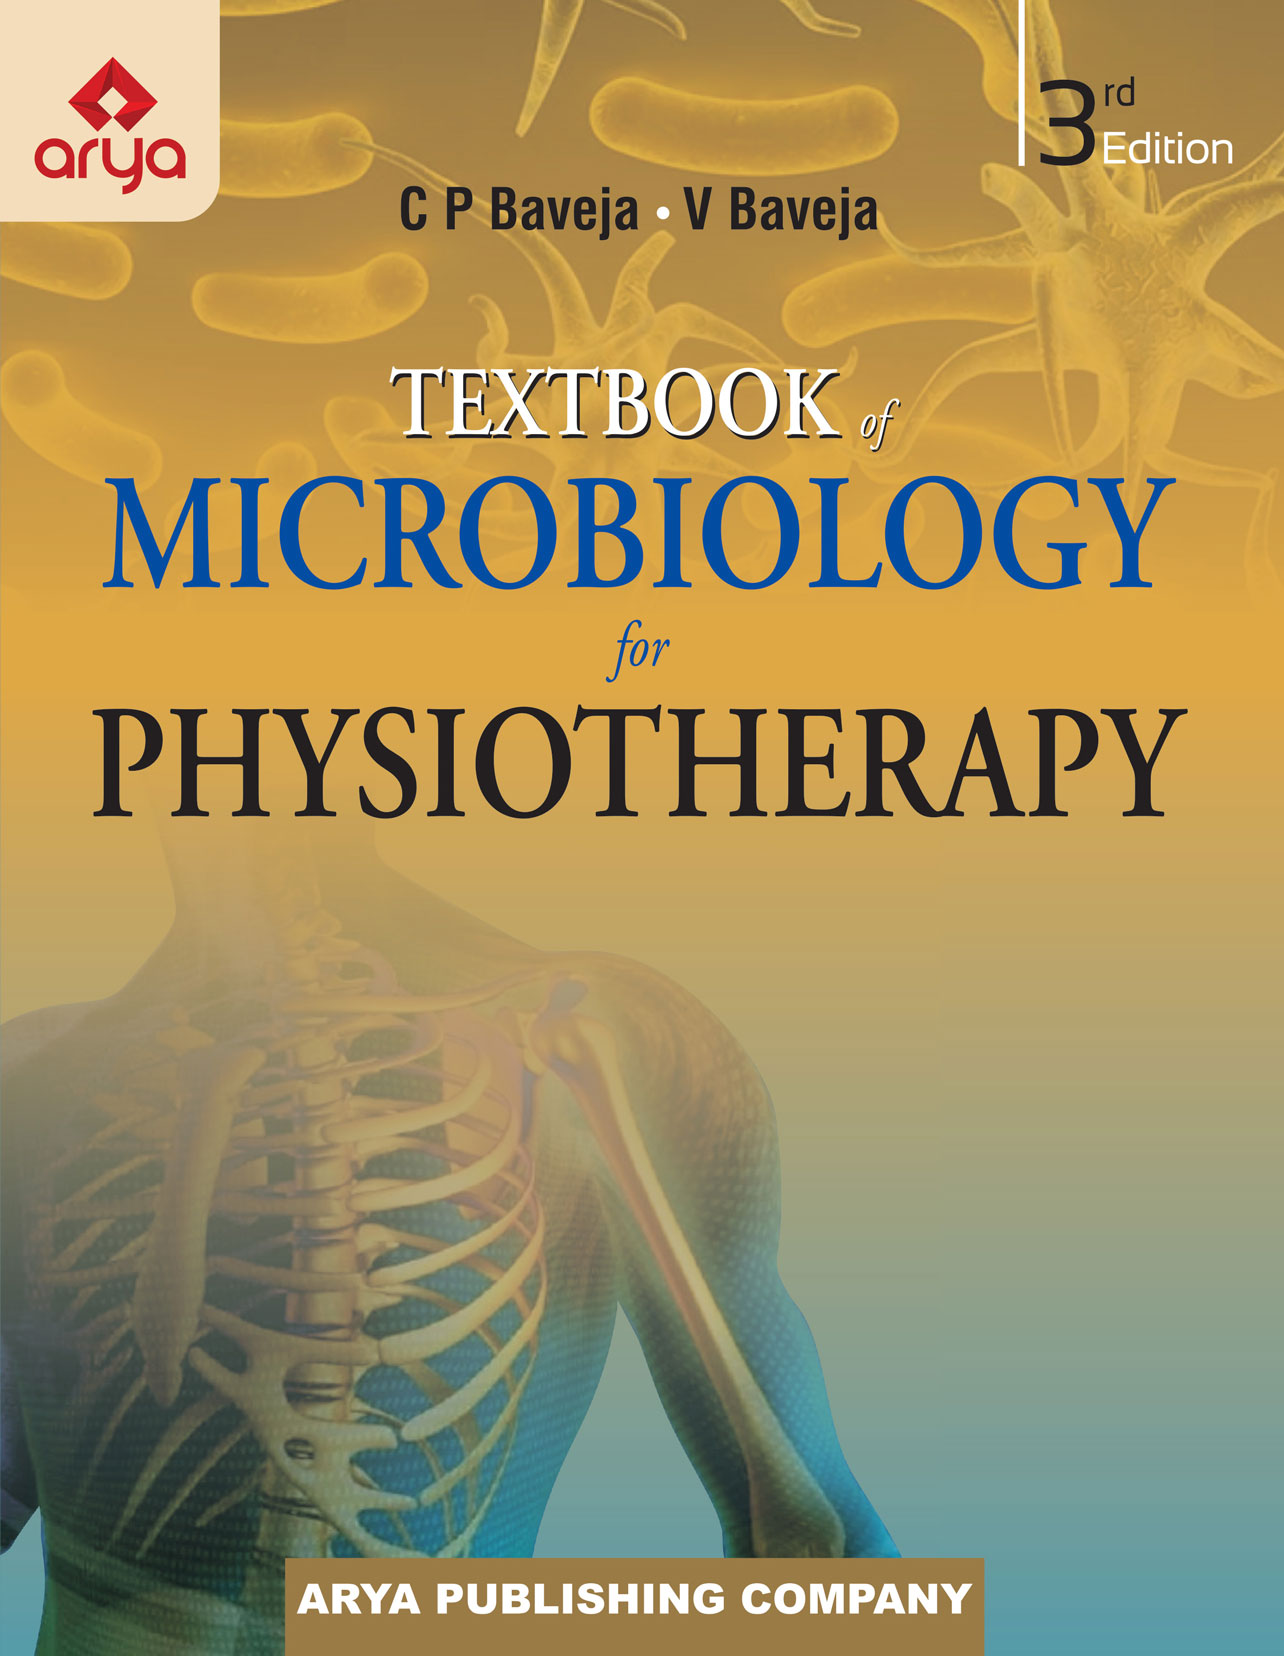 Textbook of Microbiology for Physiotherapy